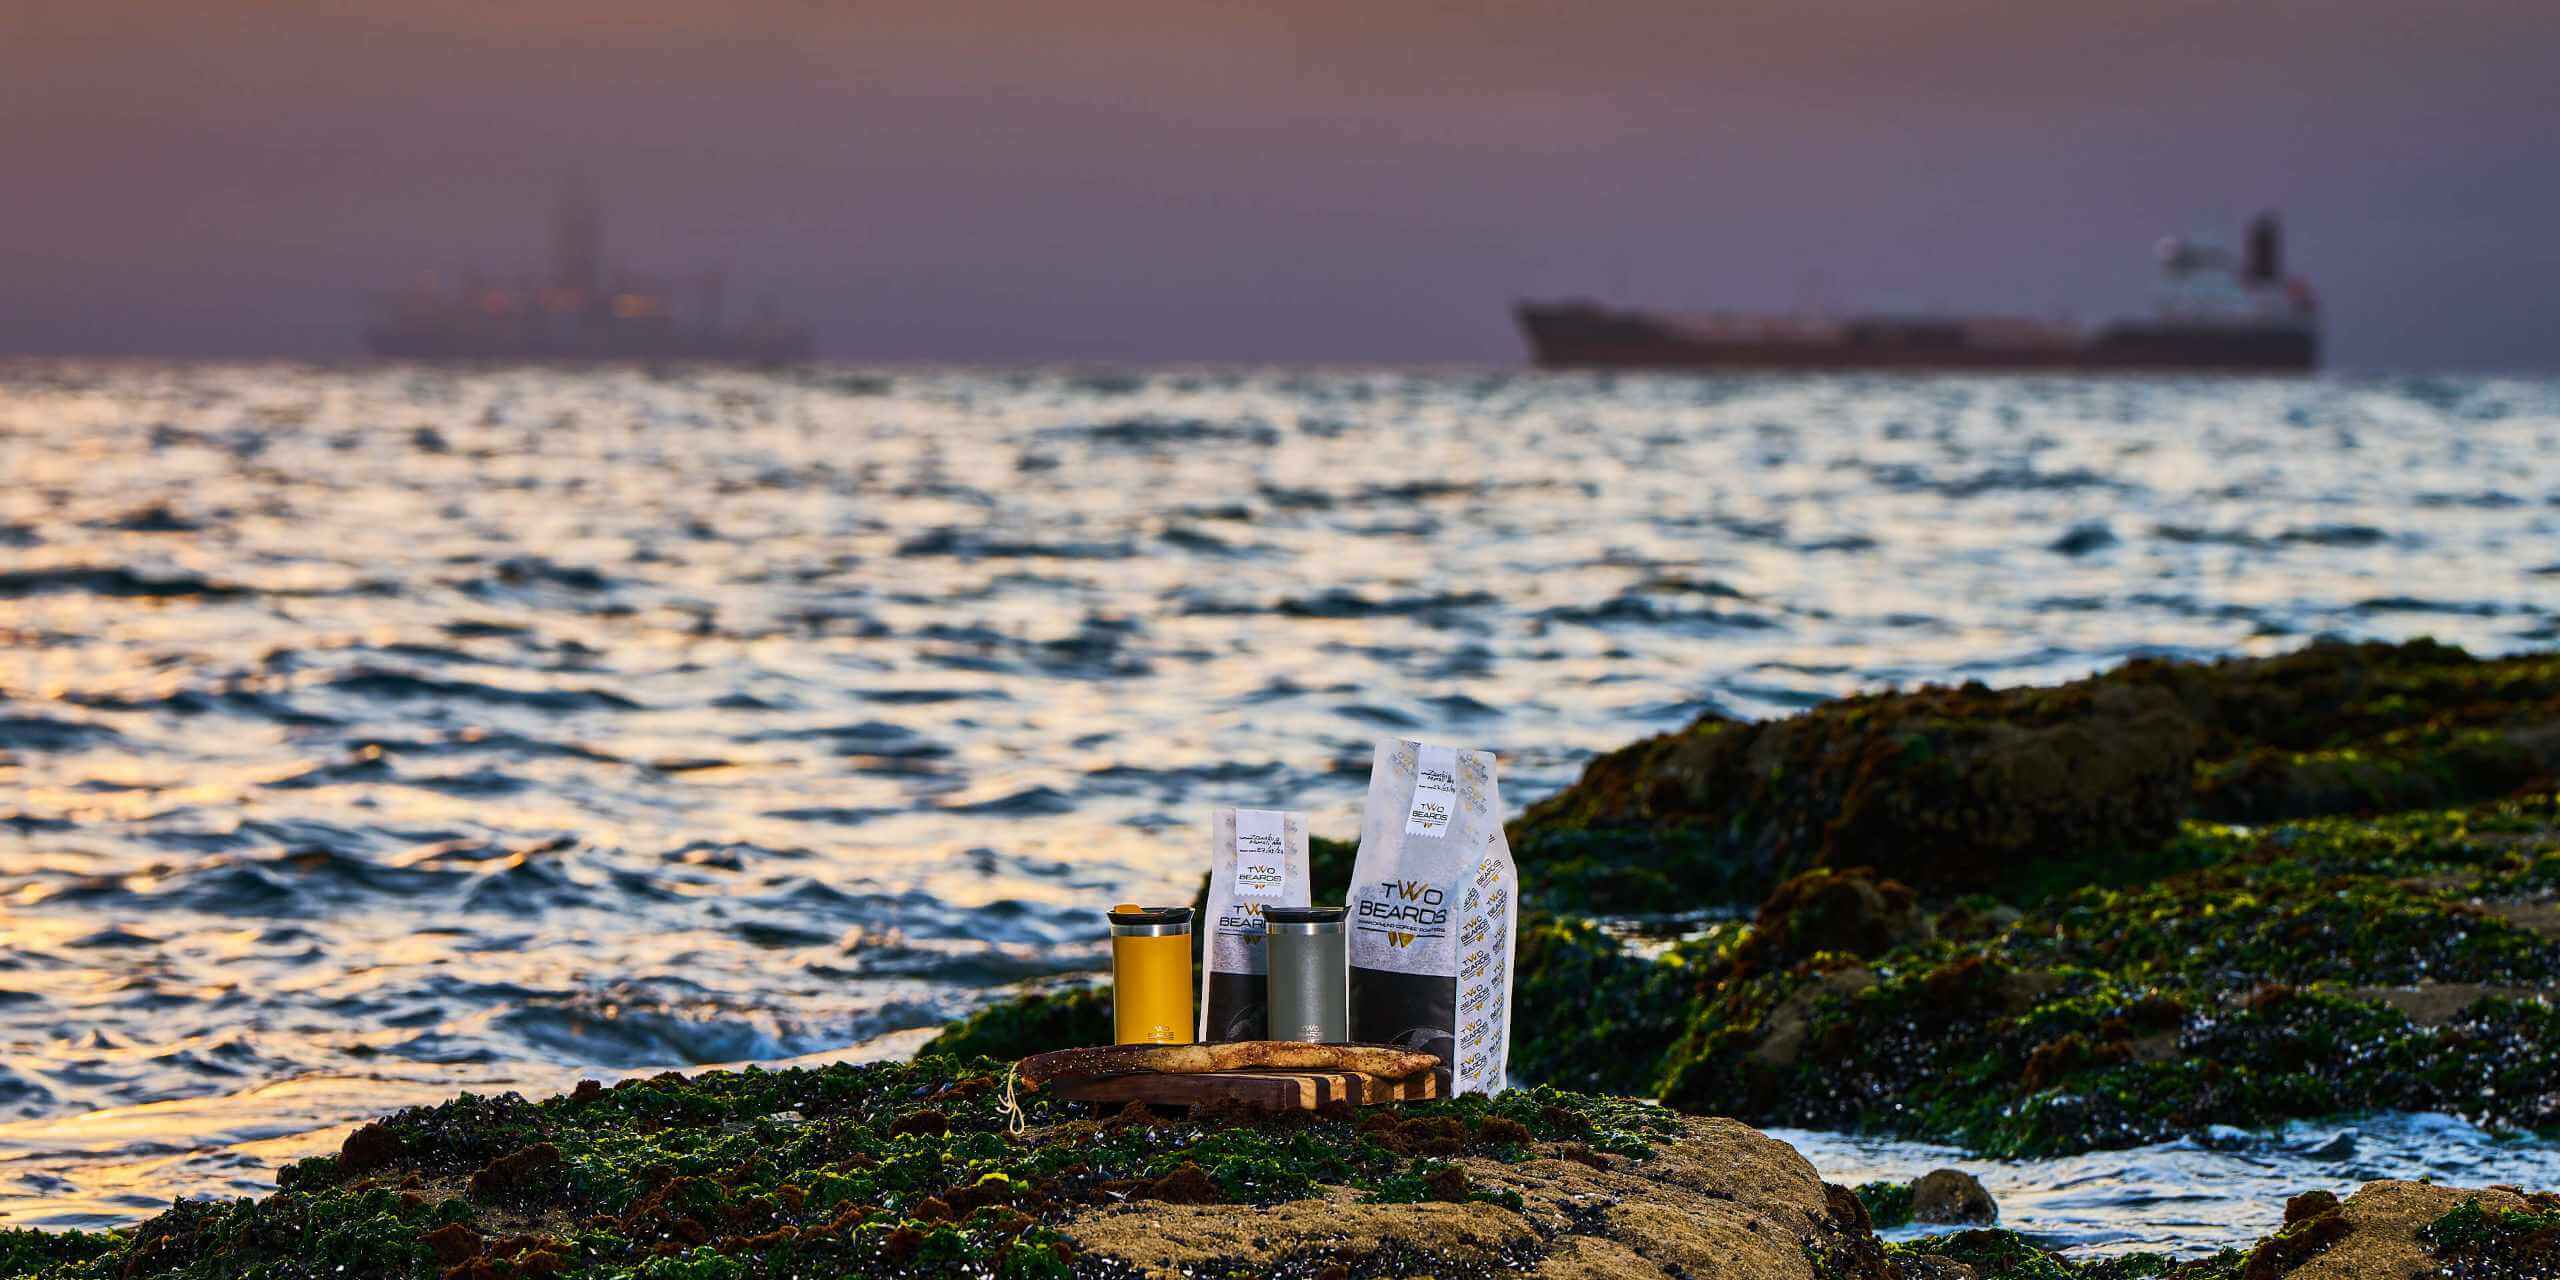 Two Beards Coffee by the Namibian Coast: The image showcases Two Beards Coffee set against the serene backdrop of Namibia's coastline. The calm sea and a distant ship are silhouetted against the soft hues of the sunset, while two coffee cups rest on a moss-covered rock, inviting viewers to enjoy a peaceful coffee moment by the sea.